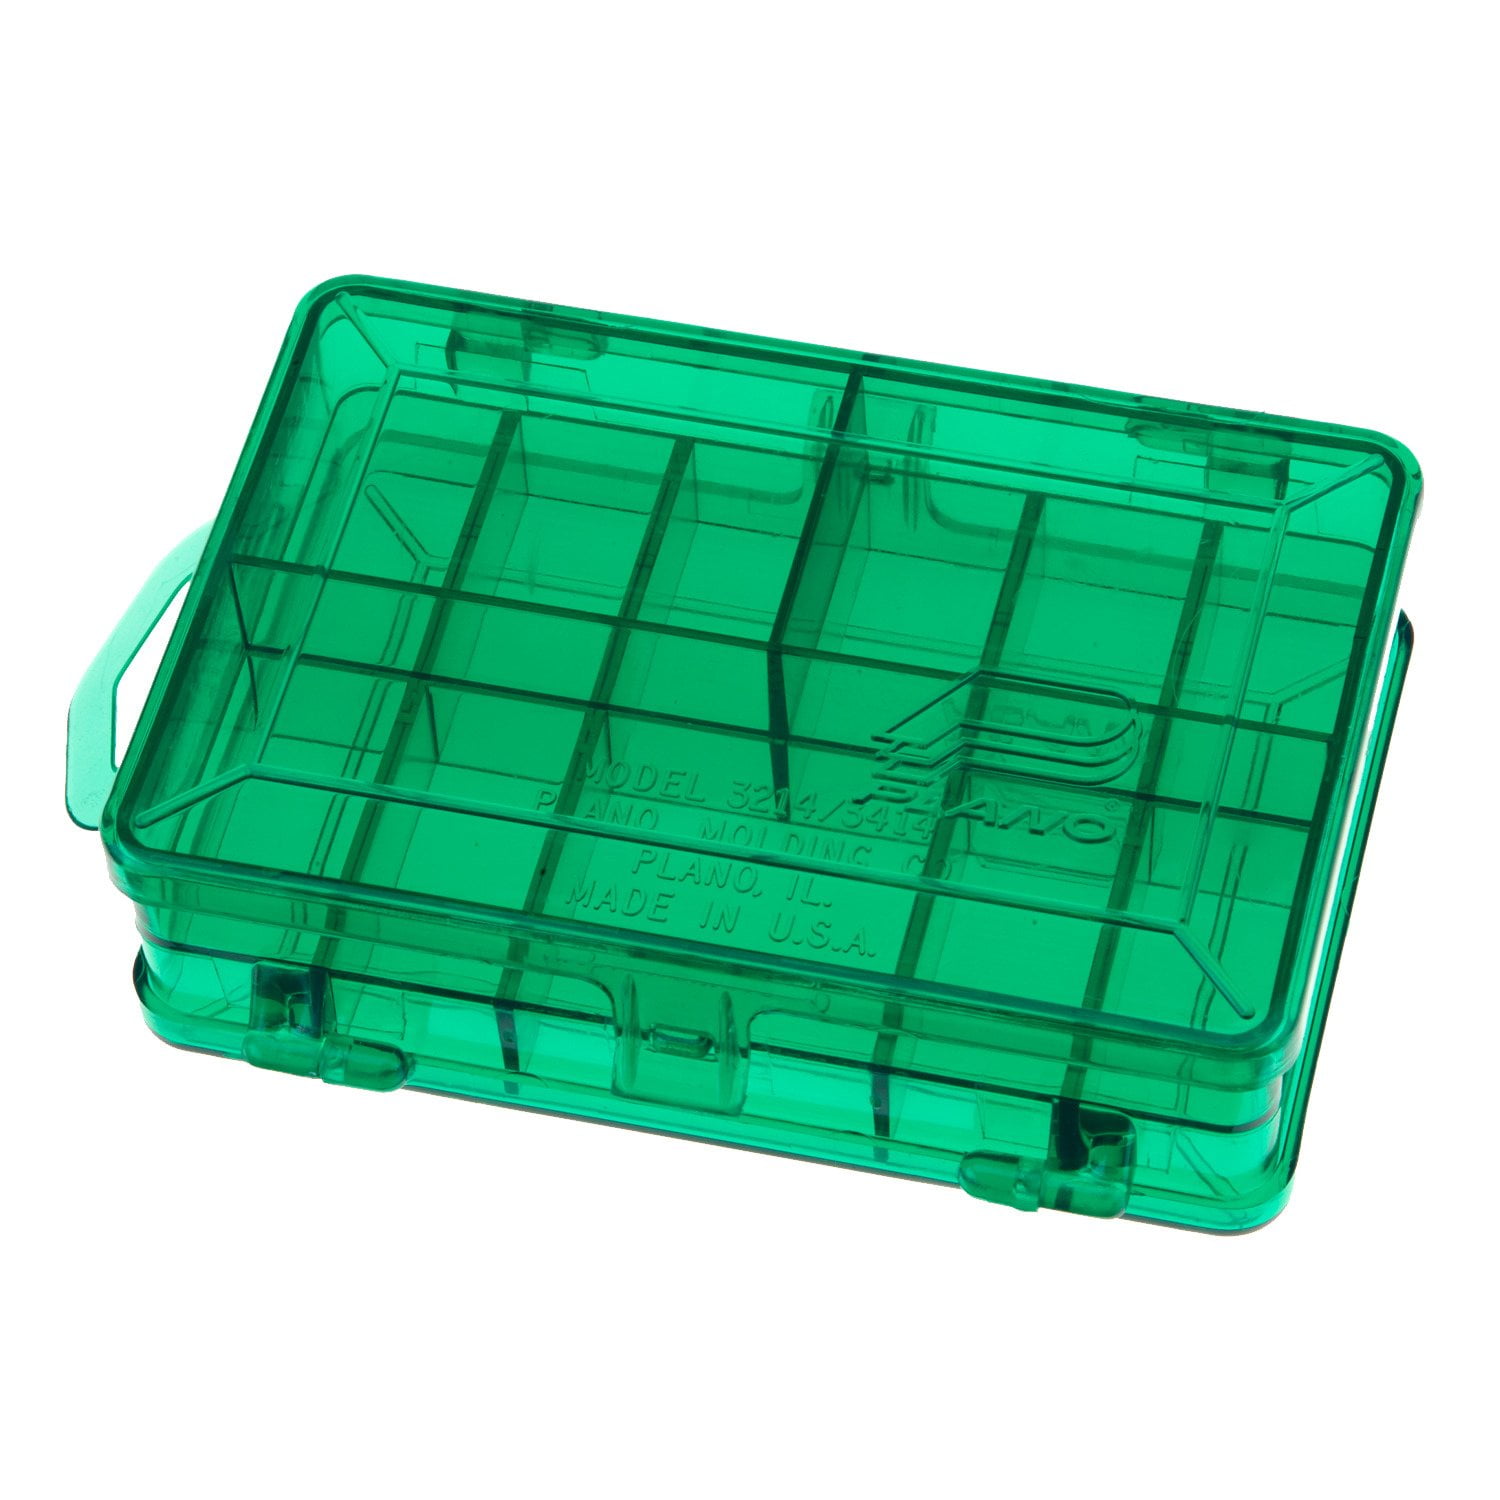 Specialist Tackle Boxes, Large & Small Storage